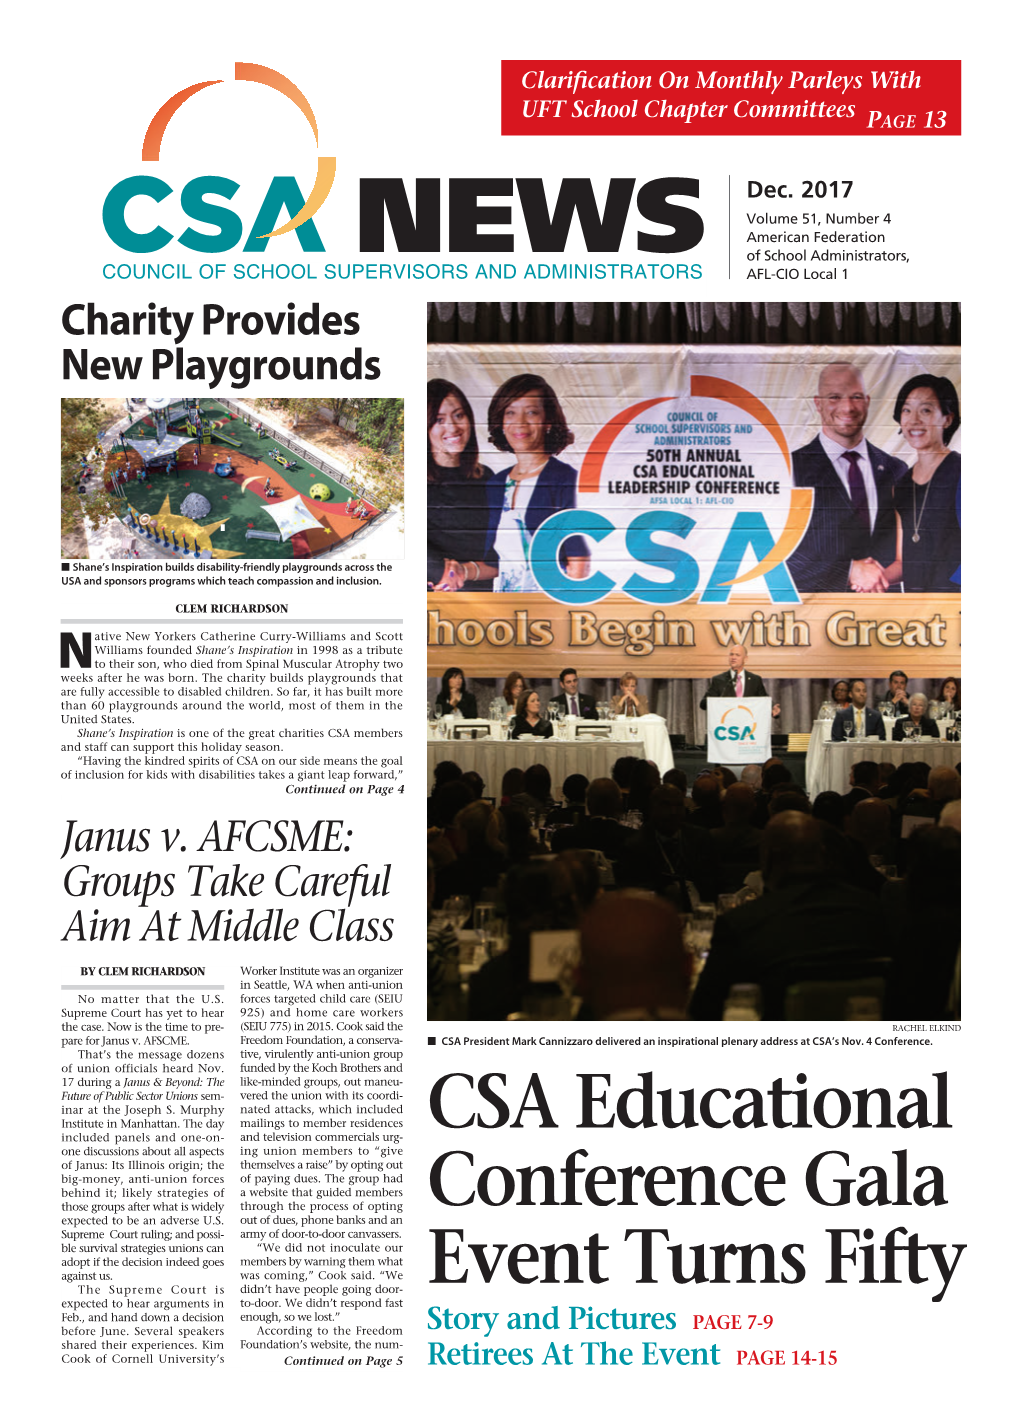 CSA Educational Conference Gala Event Turns Fifty